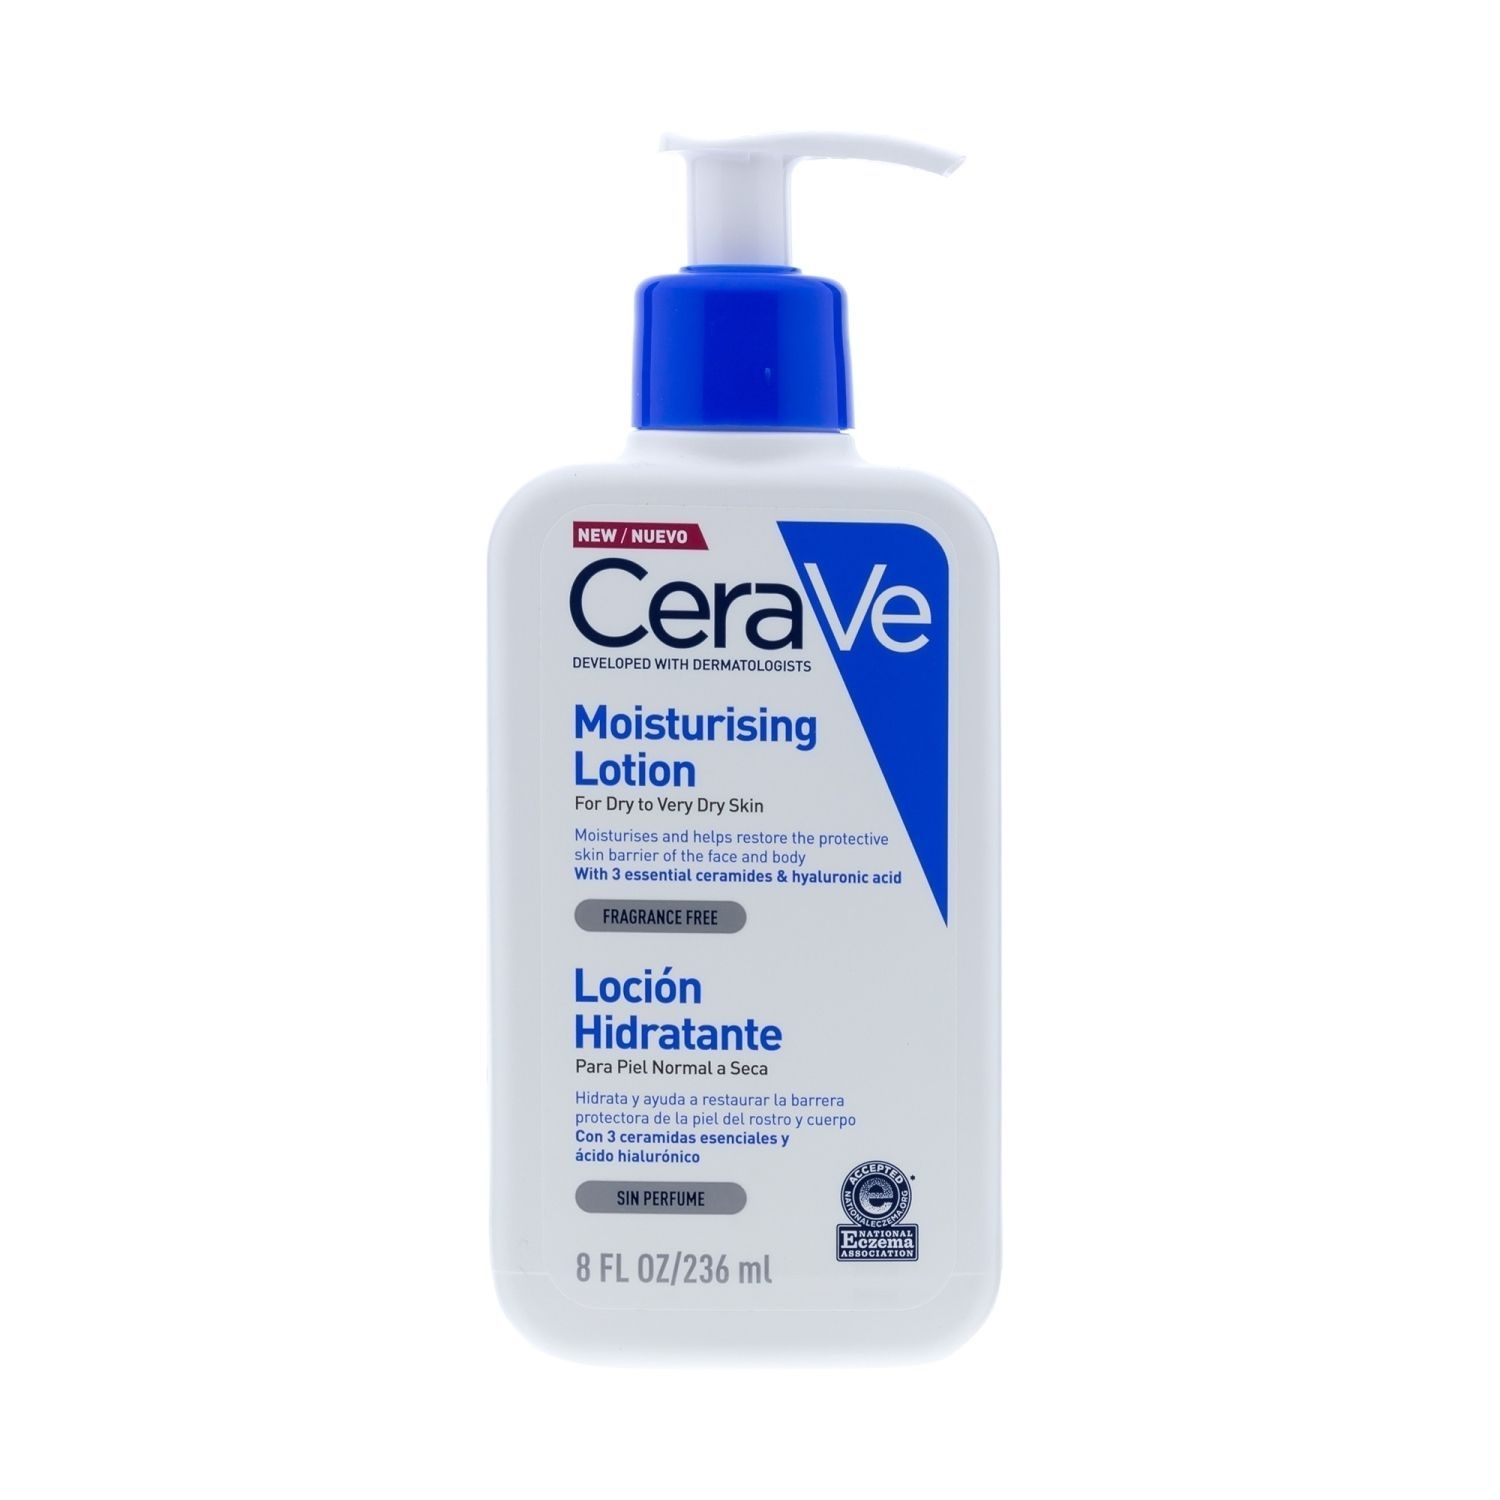 Find out if the cerave daily moisturizing lotion is good for you! 